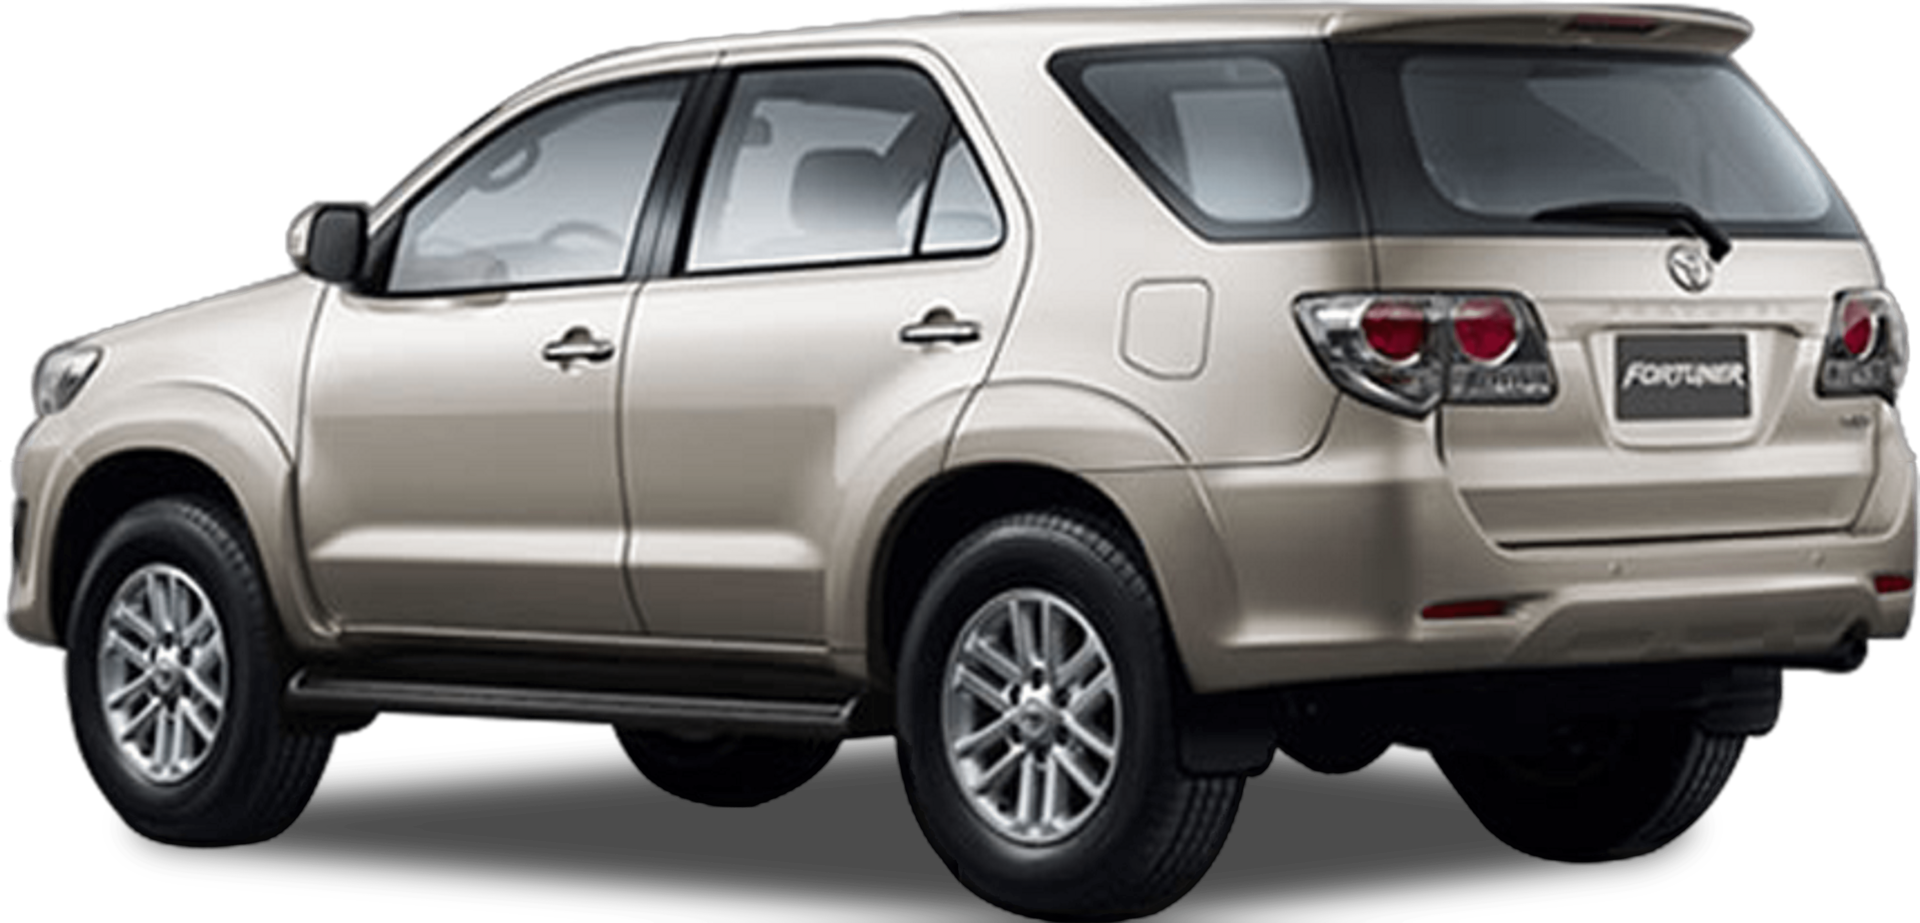 toyota fortuner top model 2755cc automatic transmission turbo engine 6 speed gear png